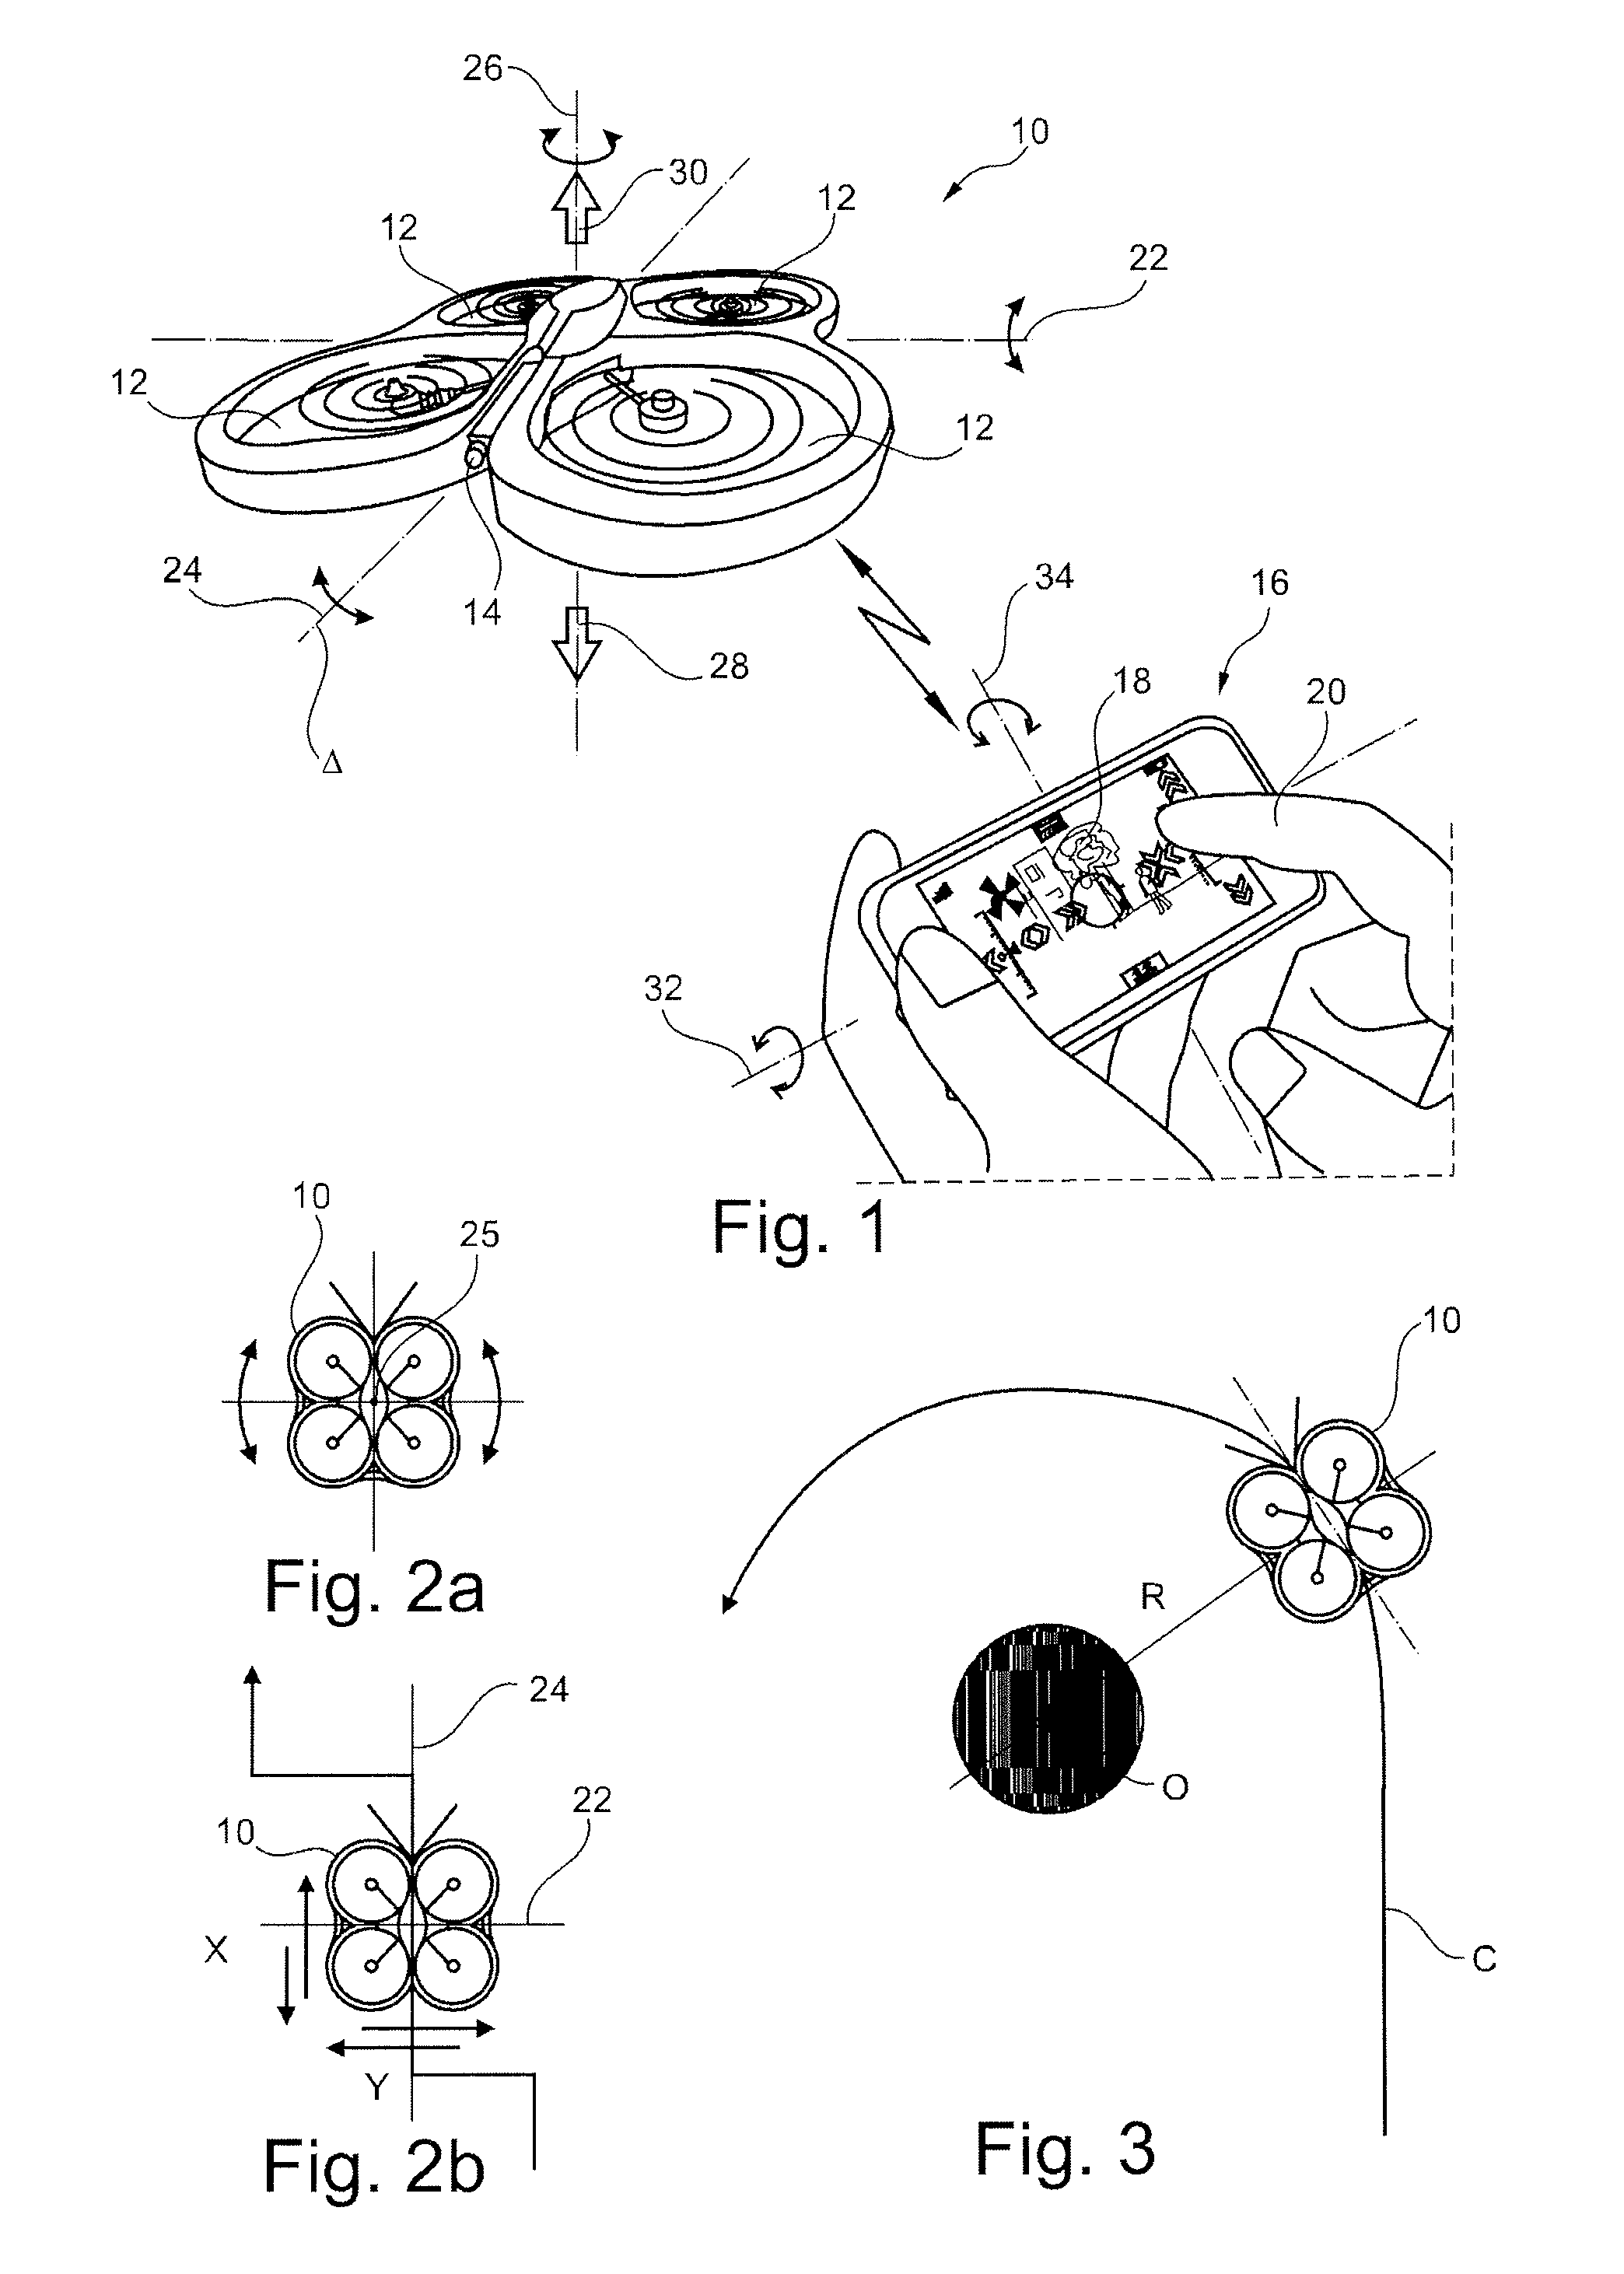 Method of piloting a multiple rotor rotary-wing drone to follow a curvilinear turn